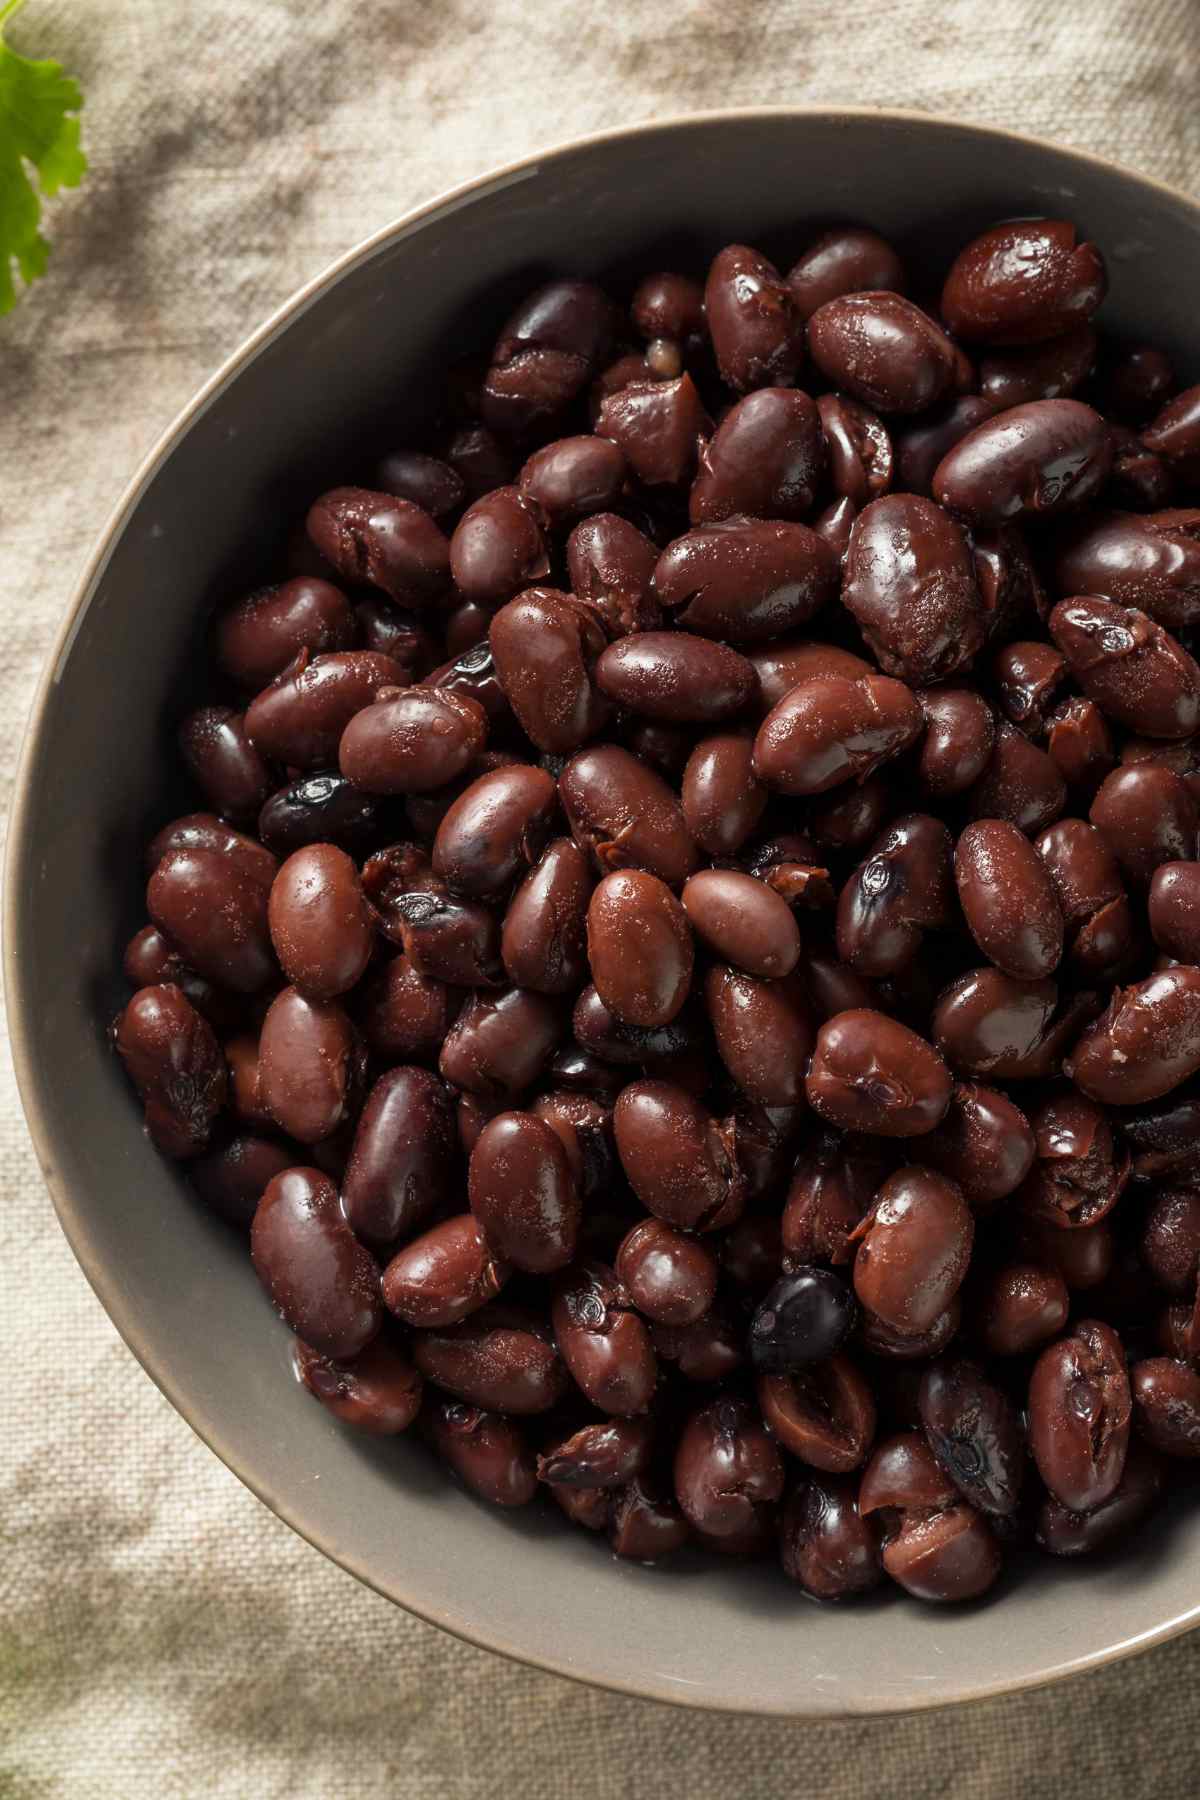 Are black beans keto? How many net carbs are in black beans? Read more to find out if this healthy and delicious bean is also keto-friendly.